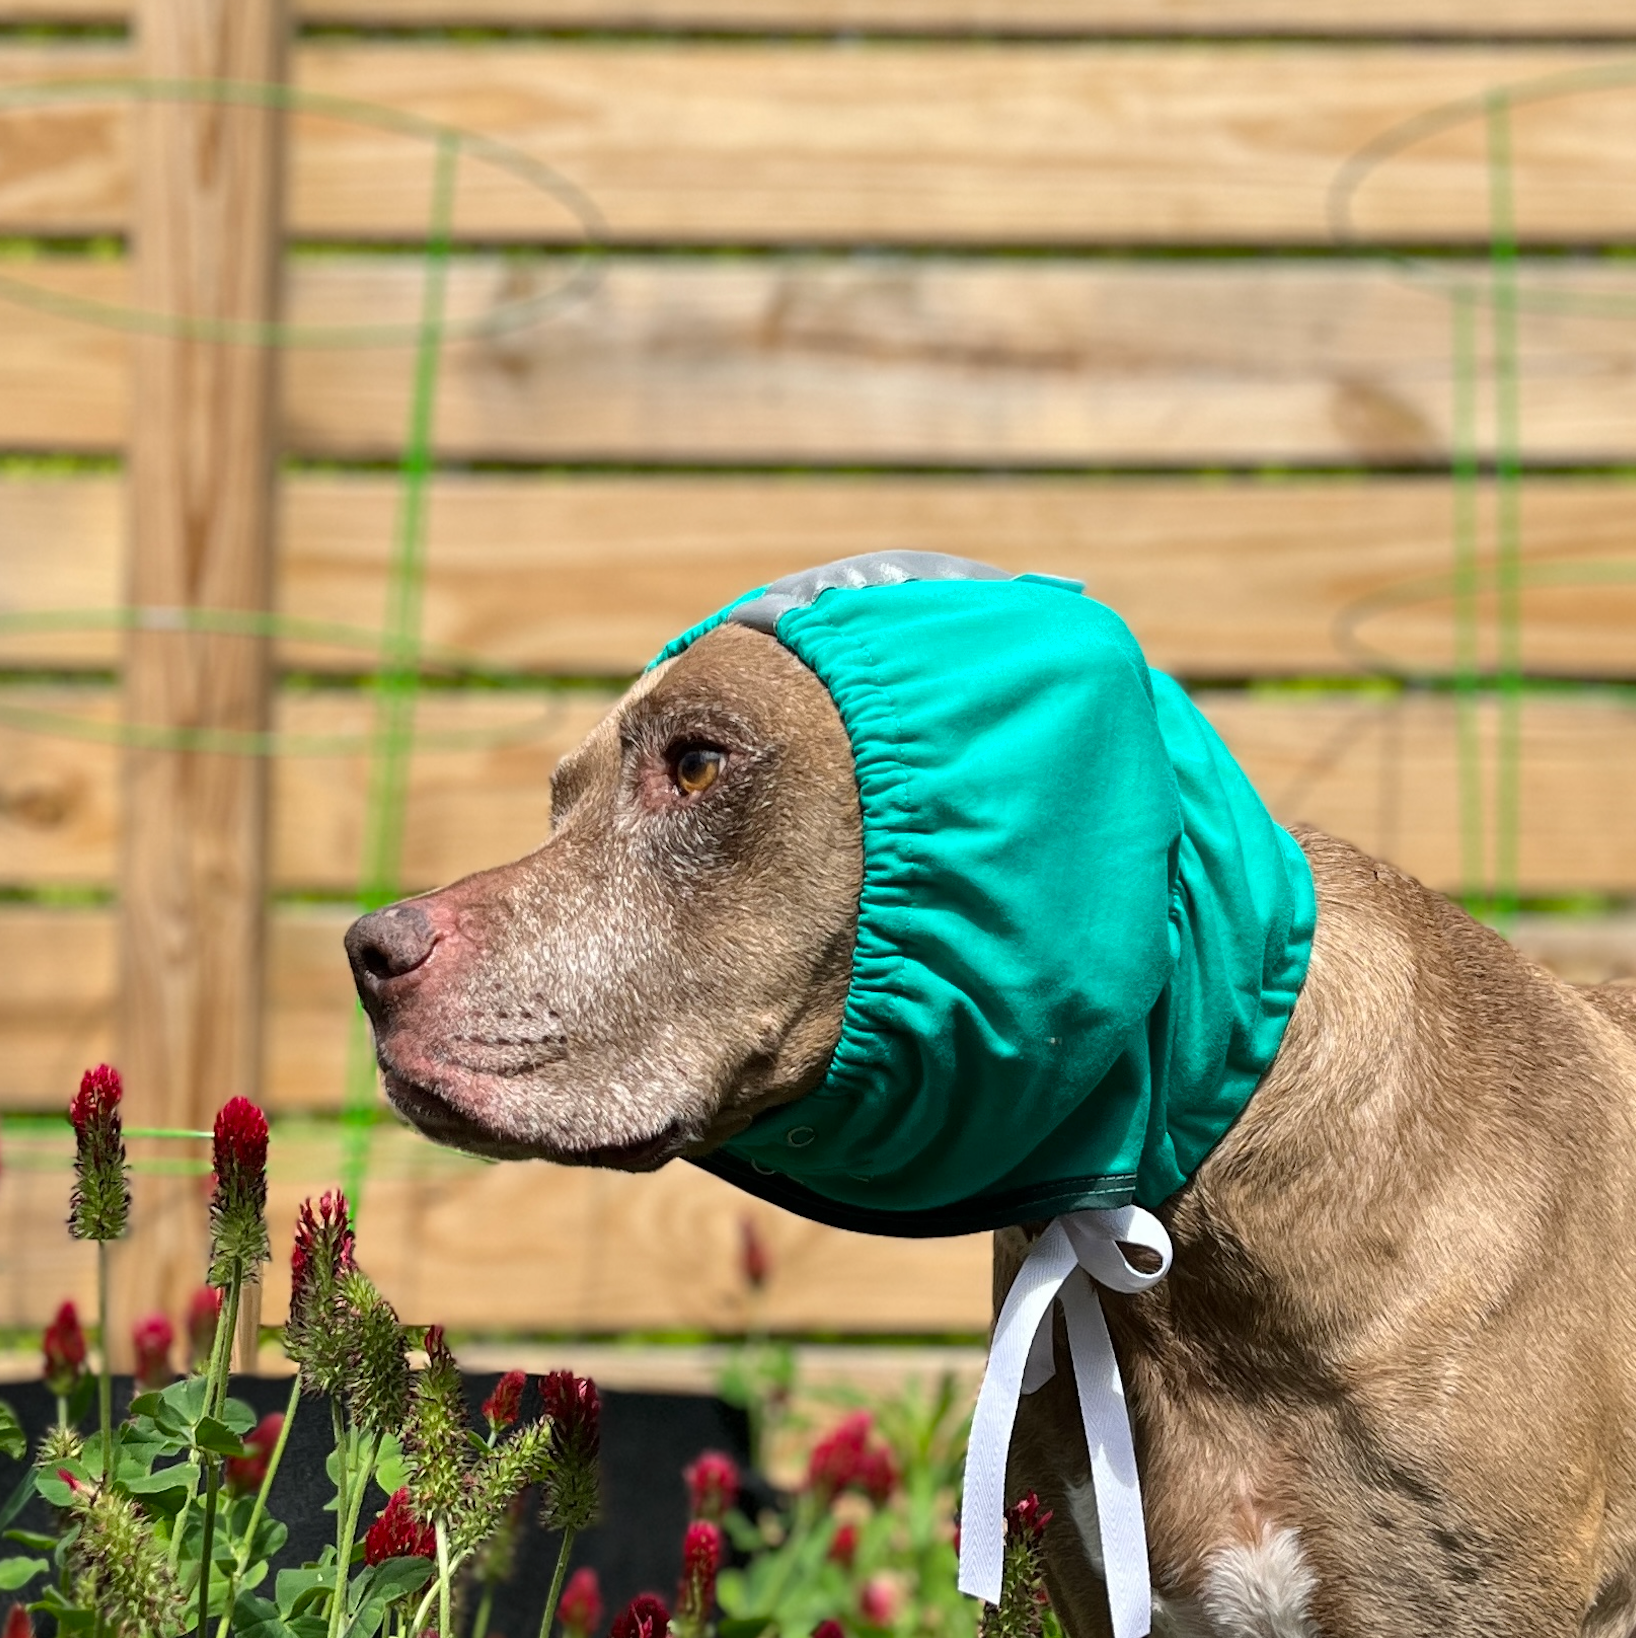 a brown pit bull type dog wearing a teal ear wrap standing in crimson clover with a wood fence in the background